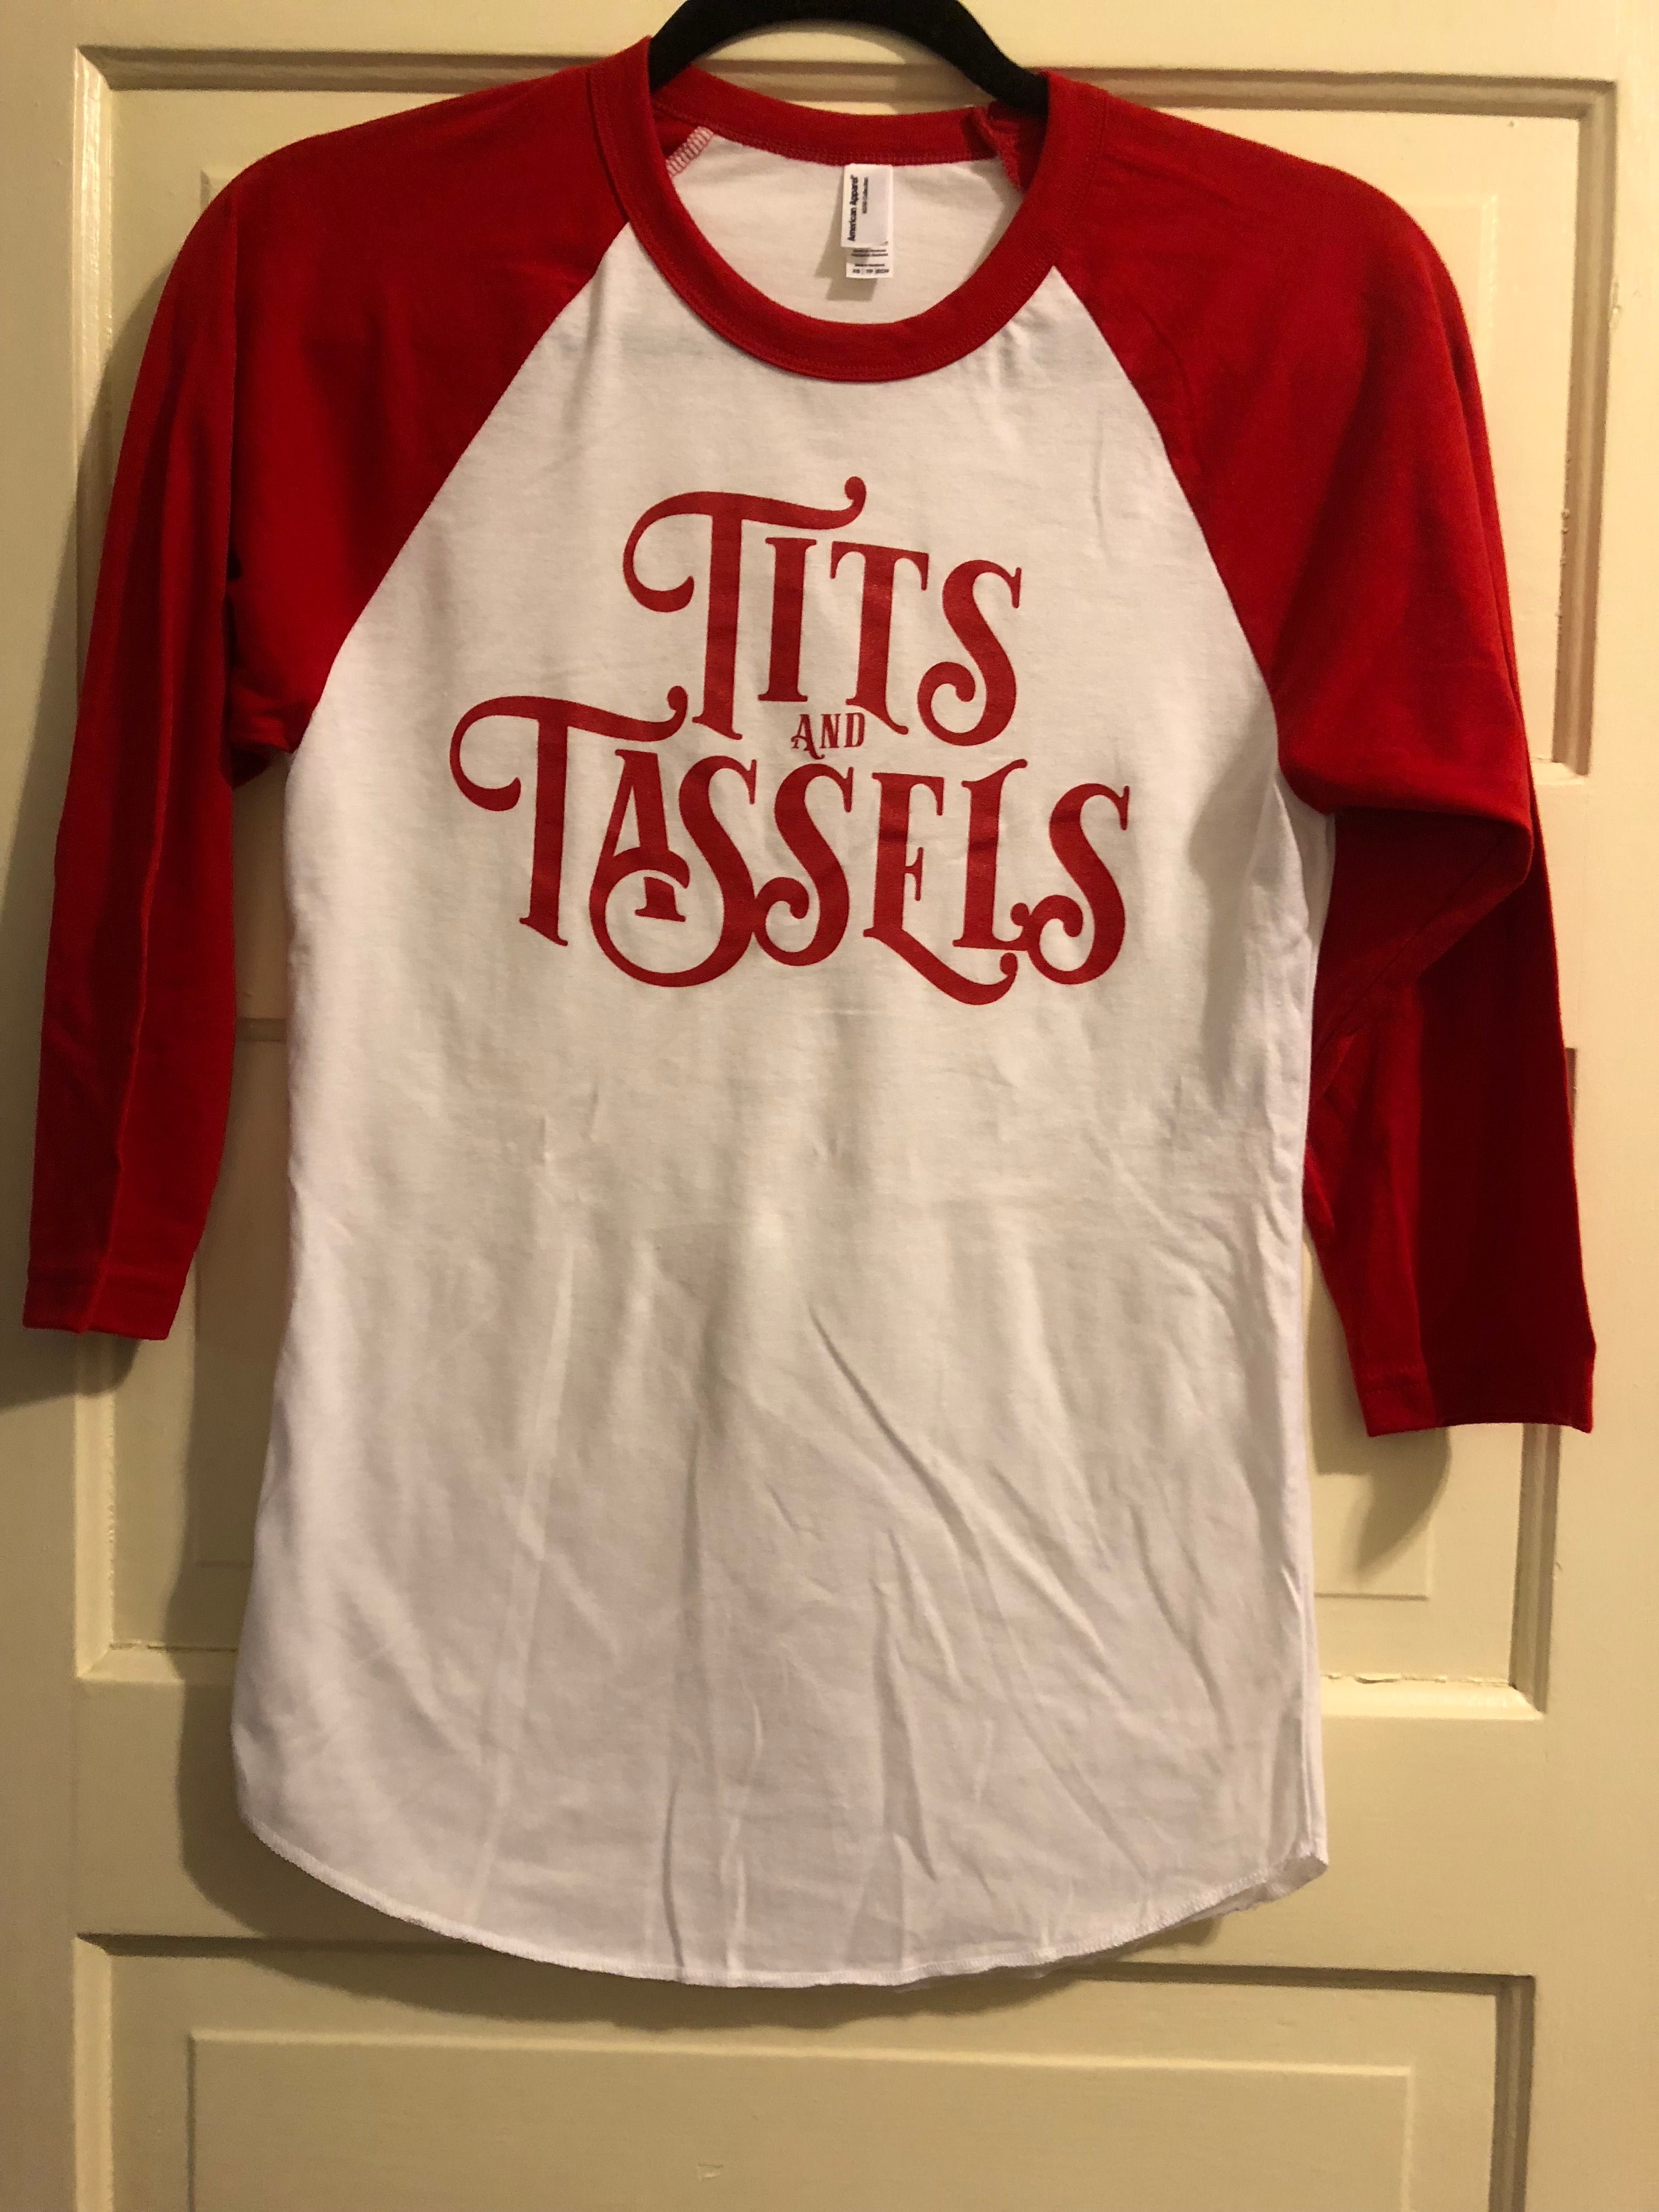 All Tits and Tassels ON SALE